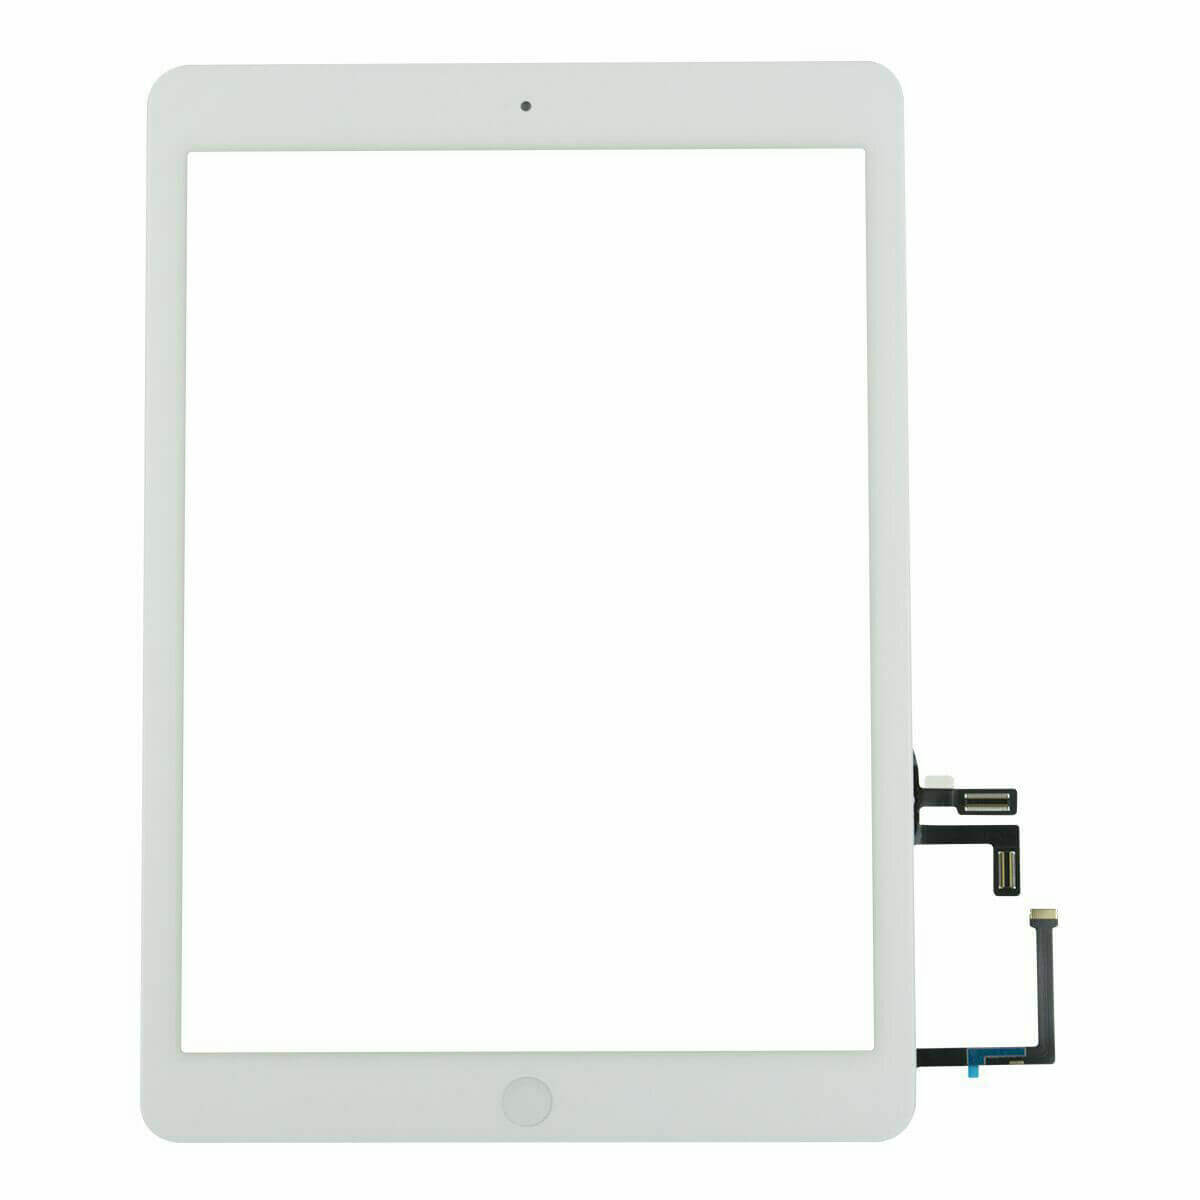 Replacement Touch Screen Digitizer For Apple iPad Air 1st Gen - White